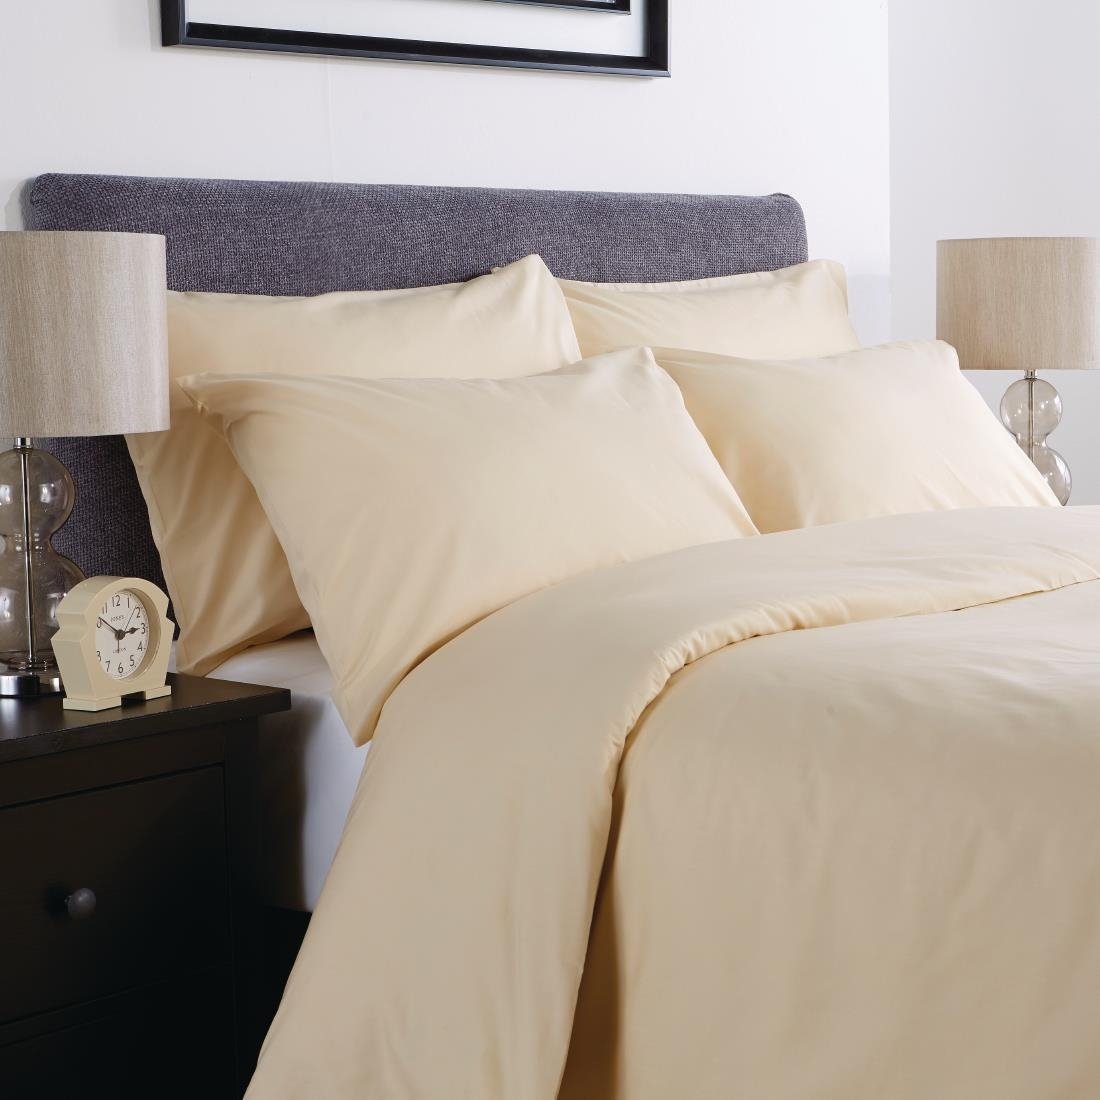 GU156 Mitre Comfort Percale Fitted Sheet Oatmeal King Size